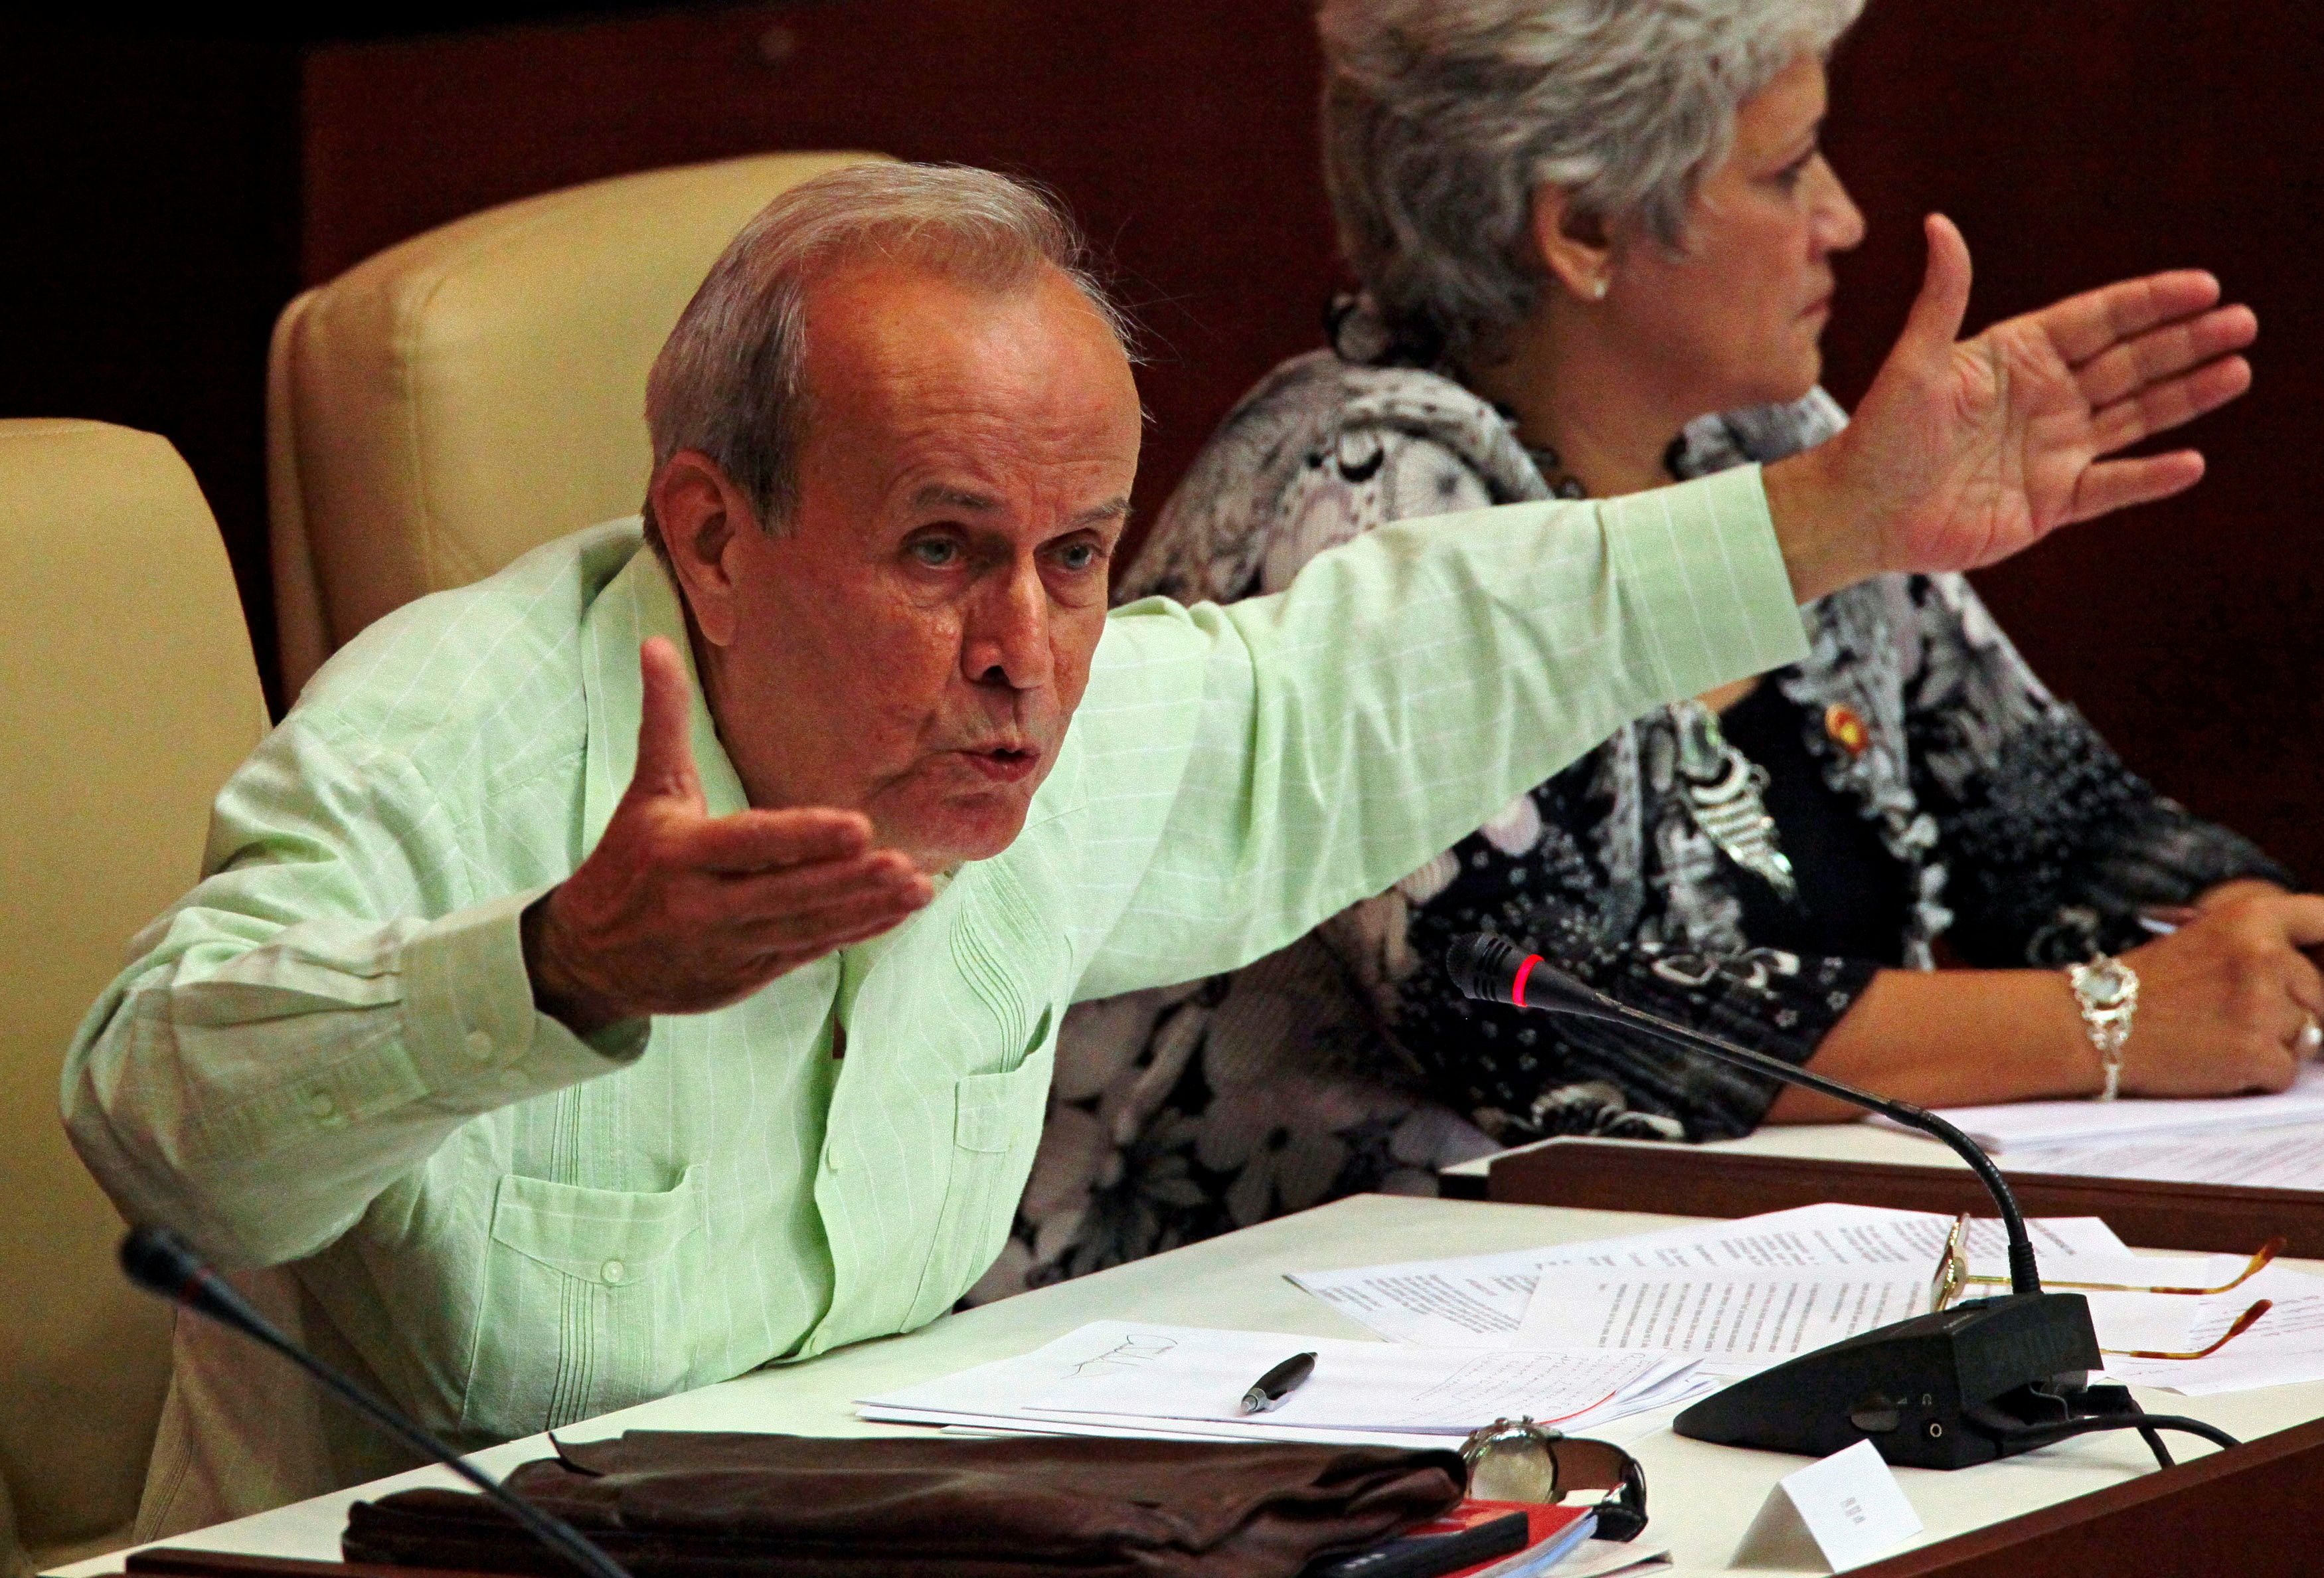 Cuba's National Assembly President Alarcon gestures during the bi-annual meeting in Havana